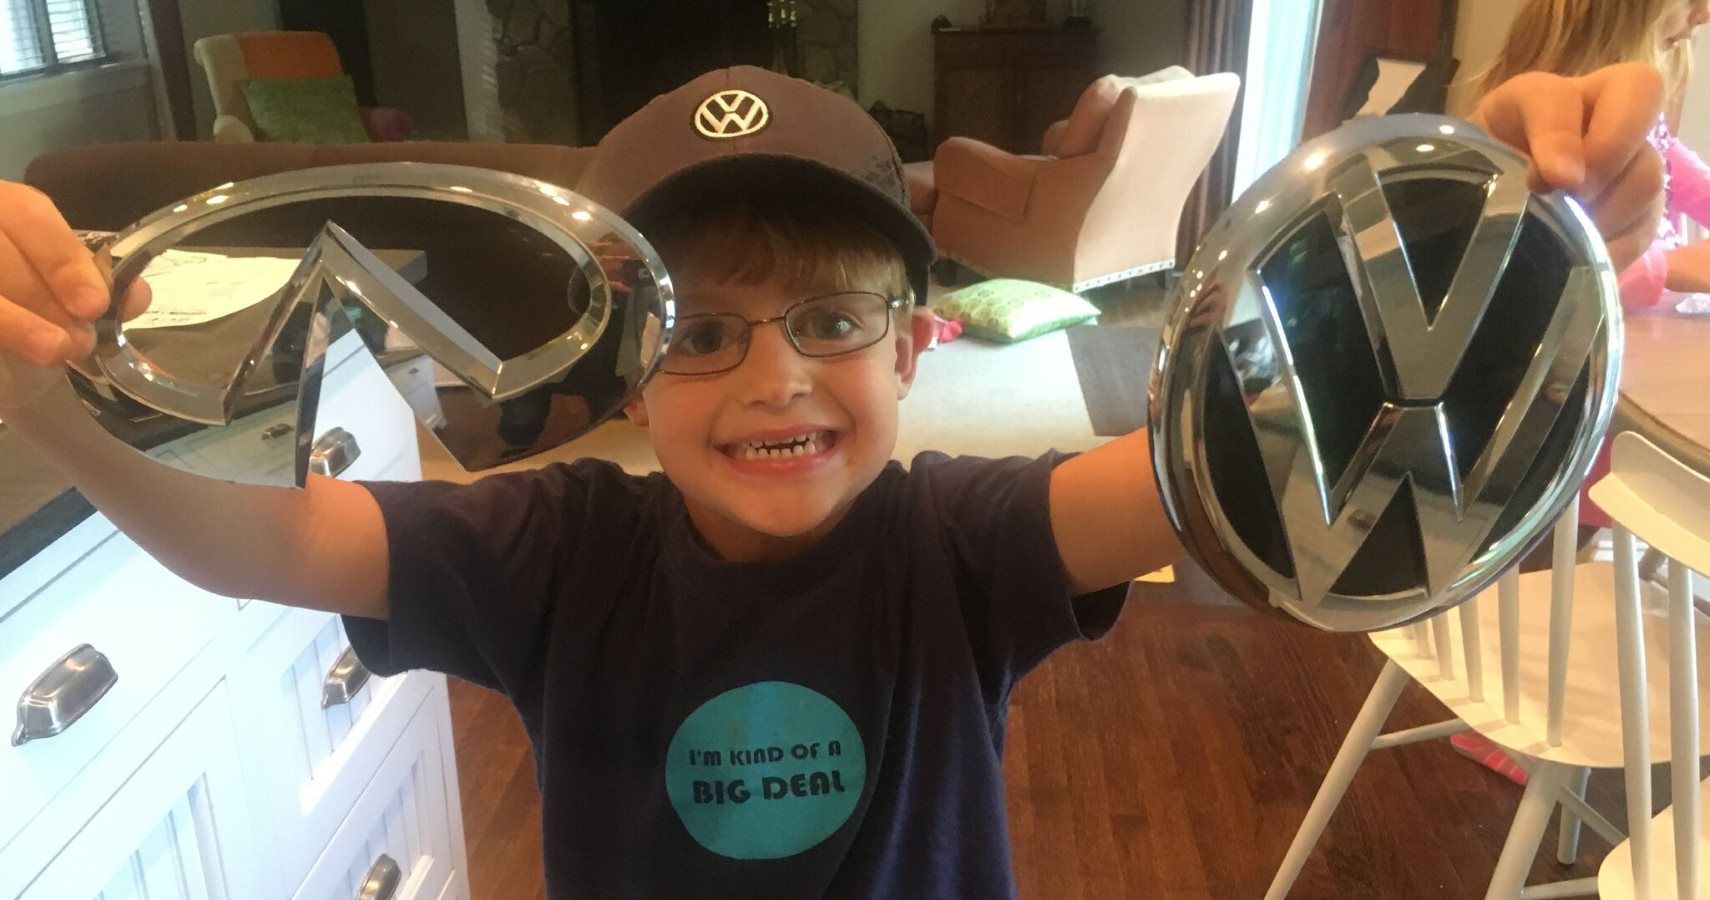 Kid Asks Every Carmaker For Decal, And They All Over-Deliver